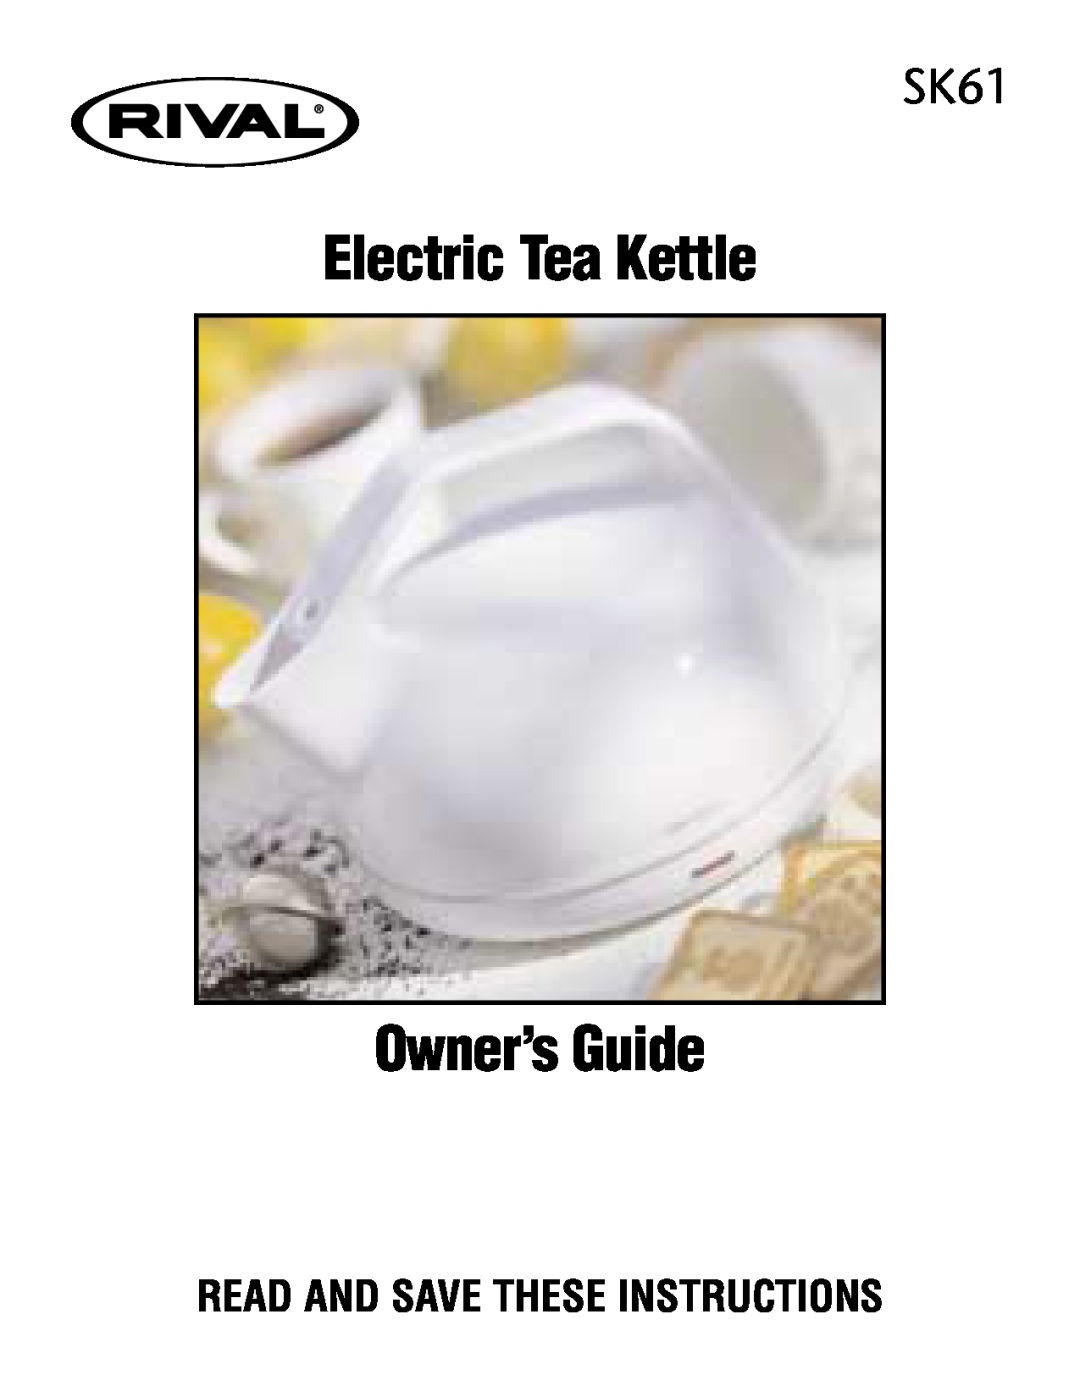 Rival SK61 manual Electric Tea Kettle Owner’s Guide, Read And Save These Instructions 